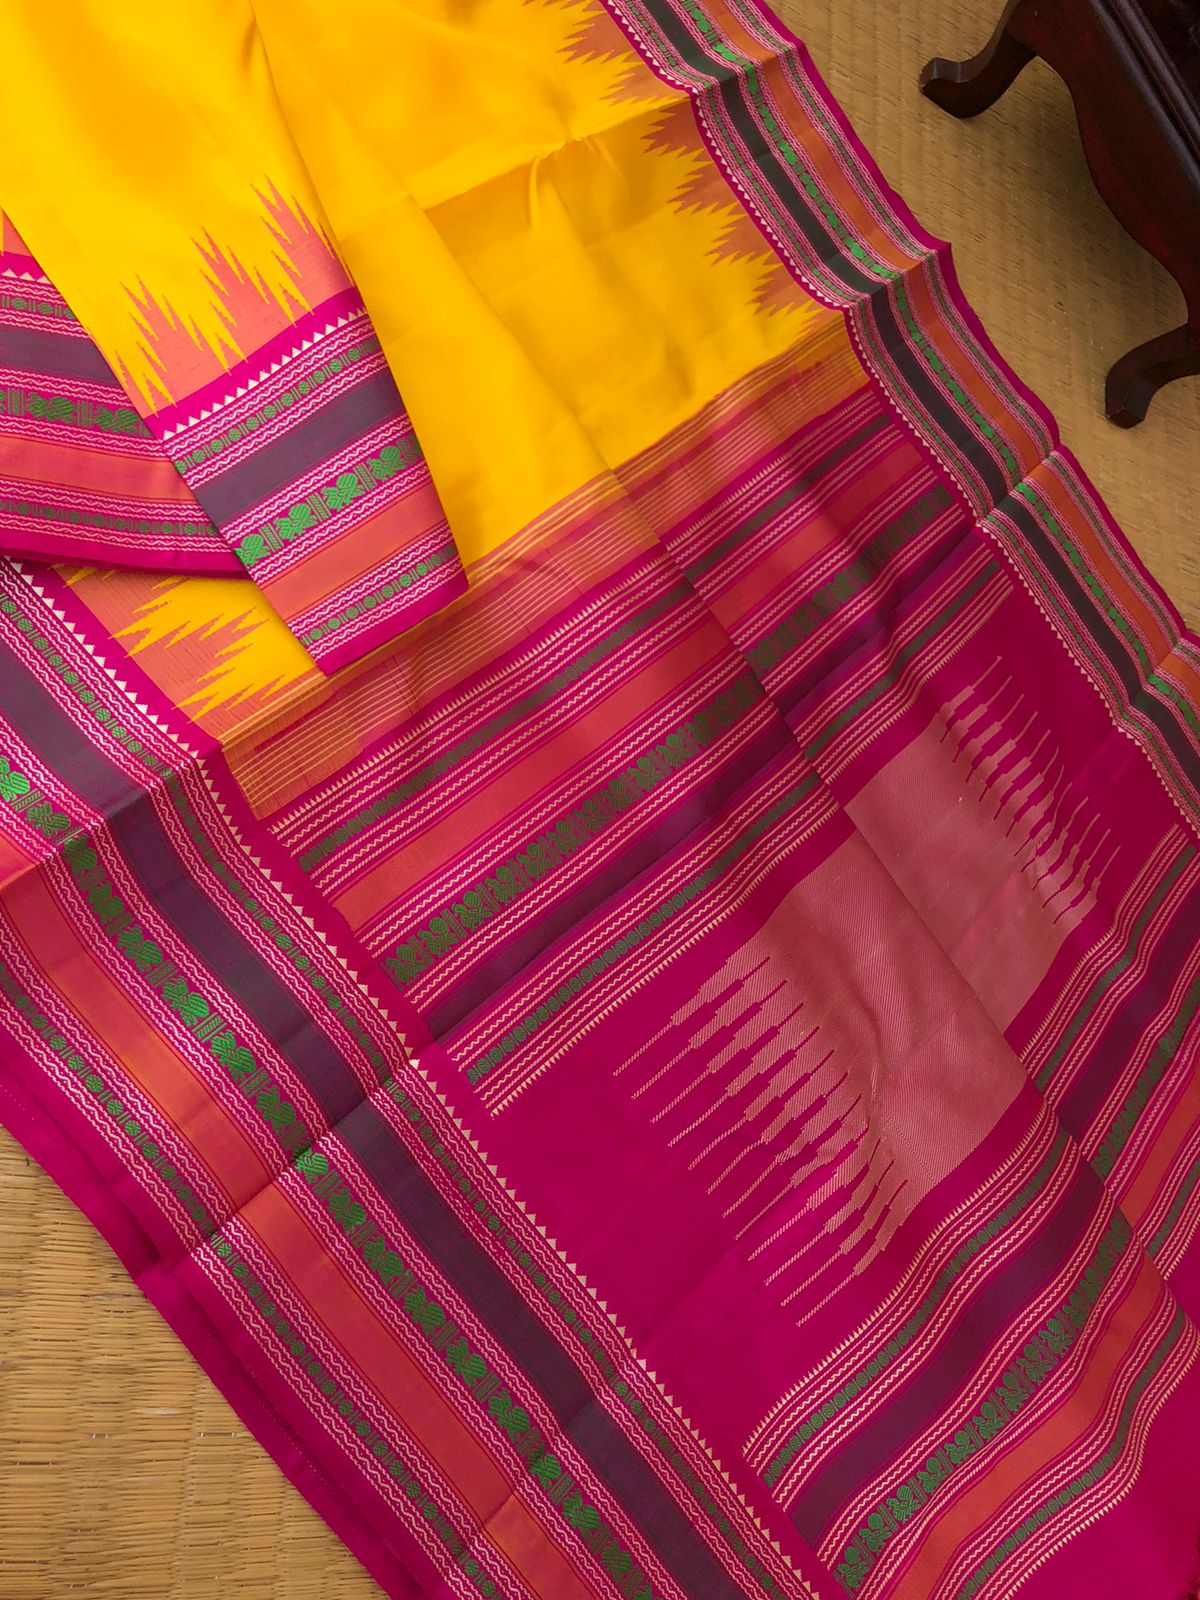 Sahasra - Beauty of No Zari Korvai Kanchivaram - the most gorgeous and amazing combination of traditional yellow and Indian pink